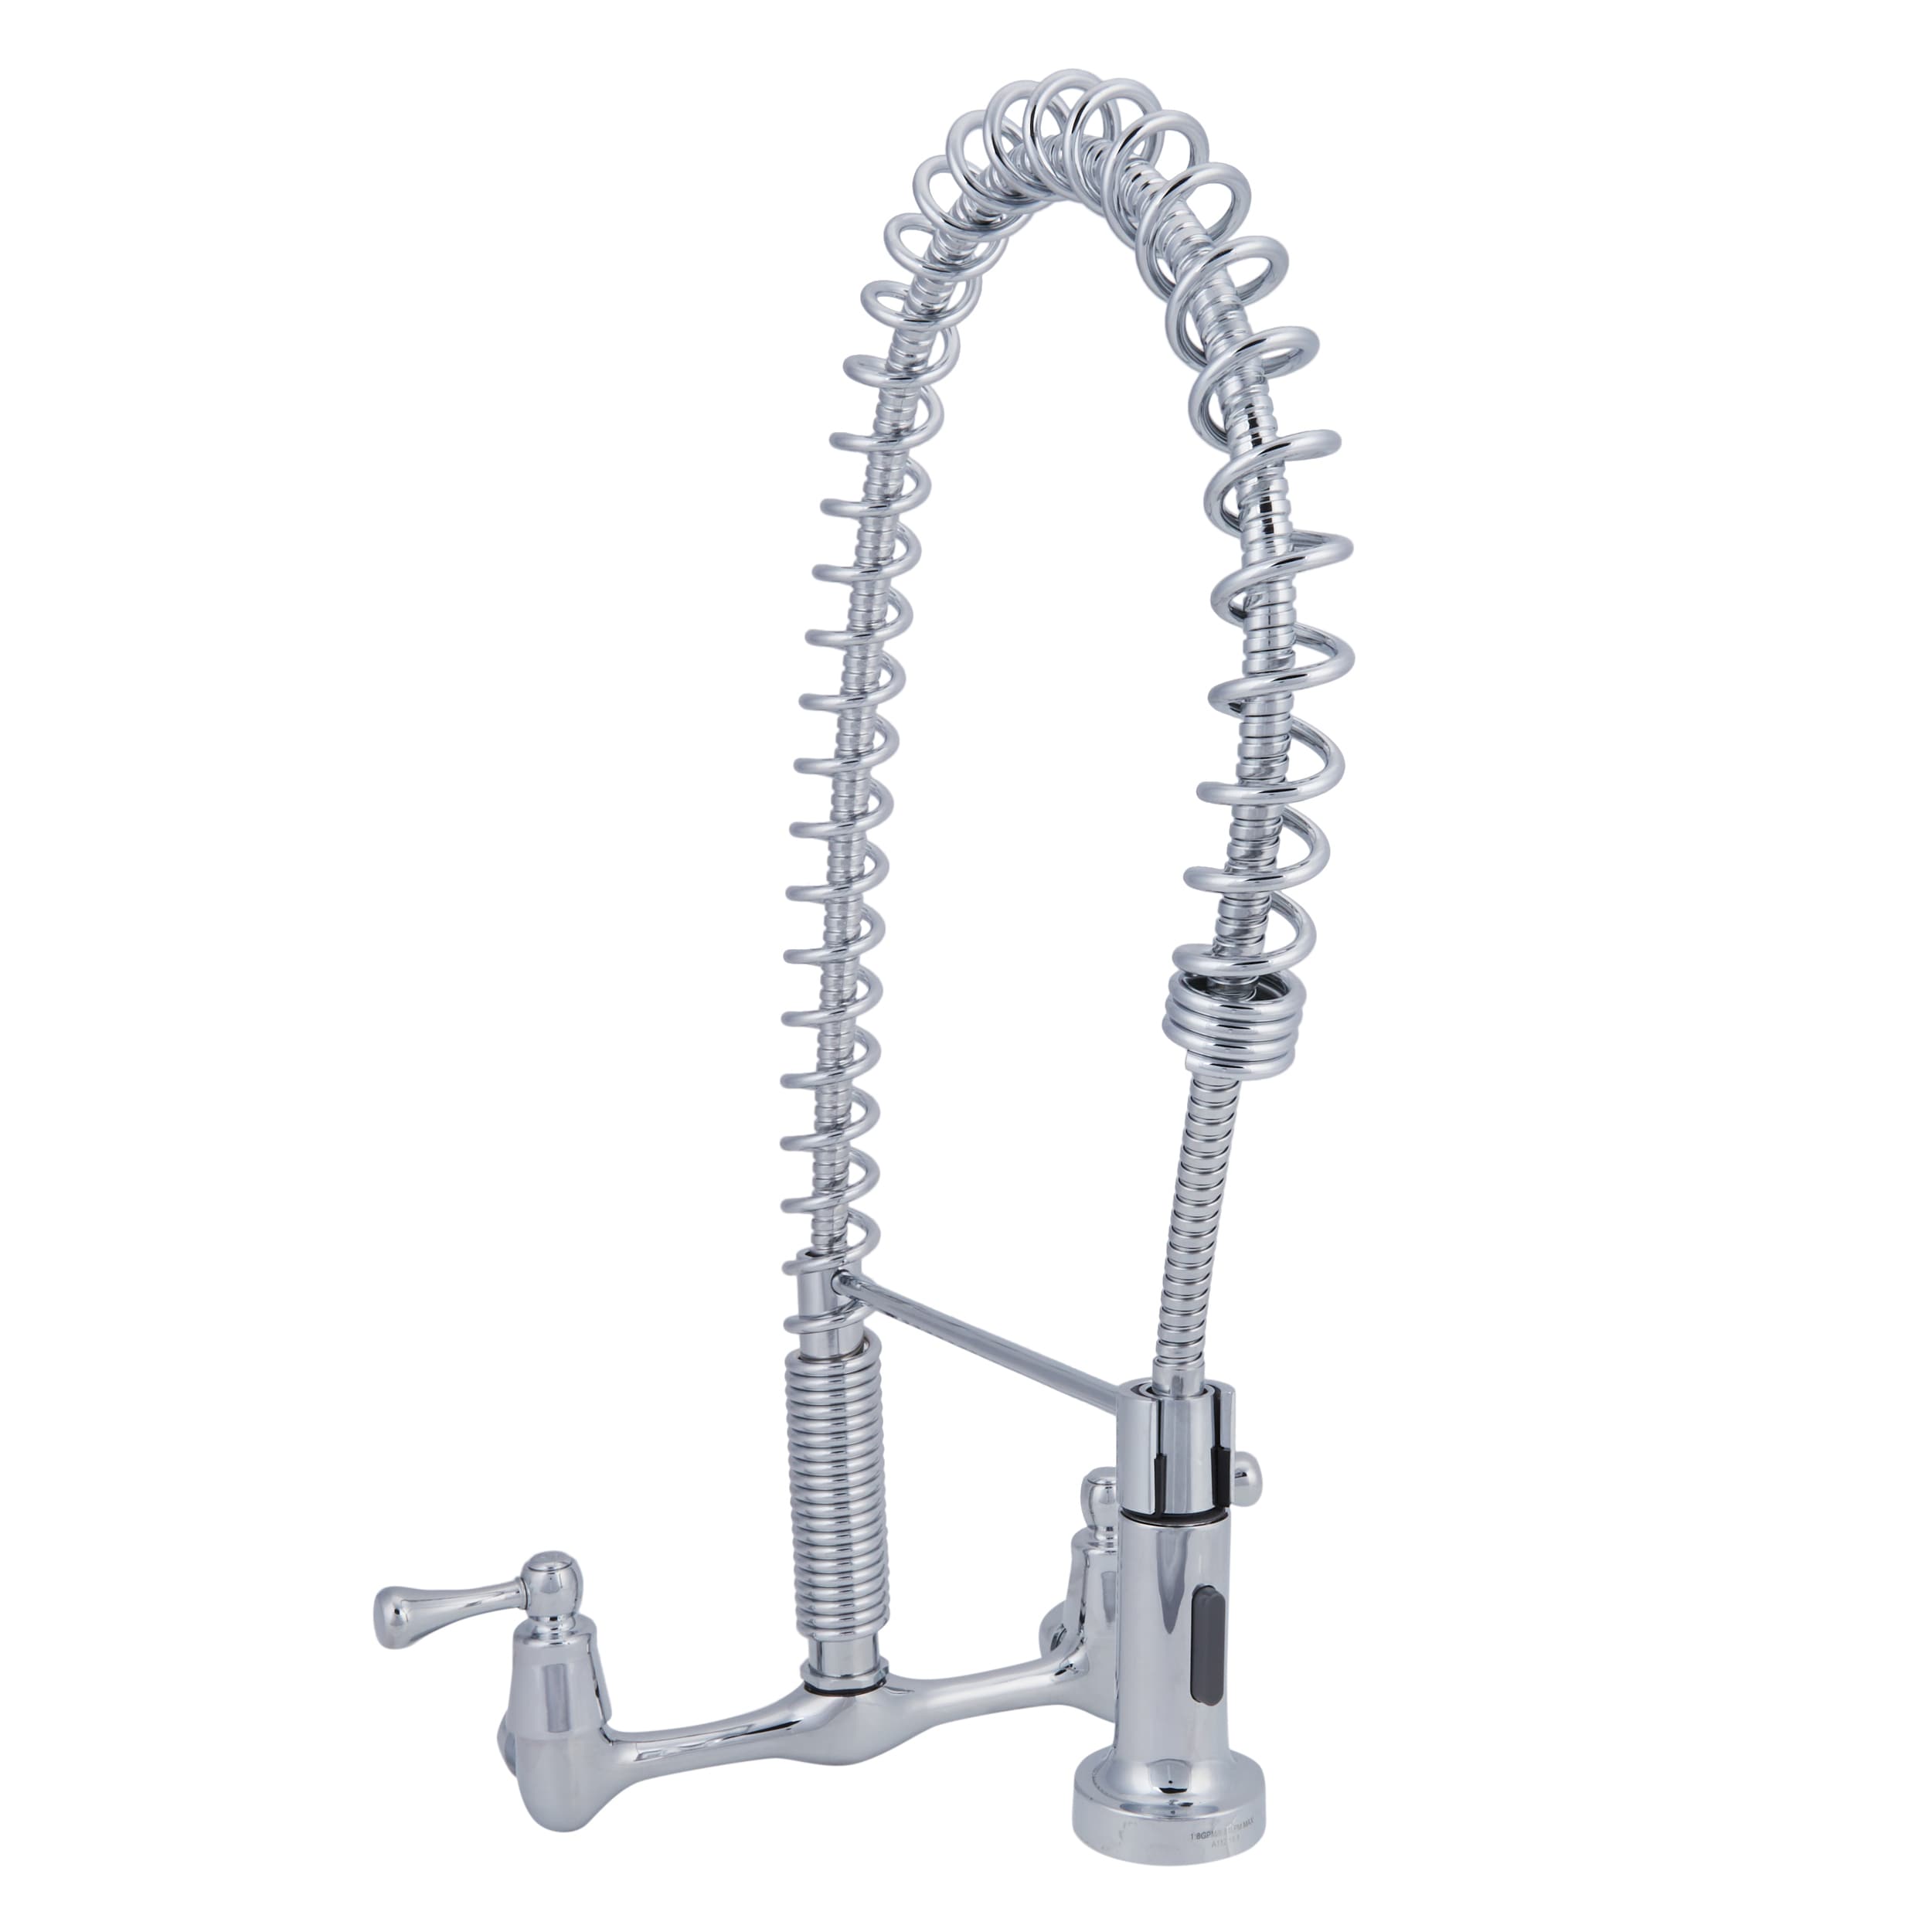 Flexible Metal Faucet Water Swtich Chrome Body Wall Mounted For Kitchen Sink 